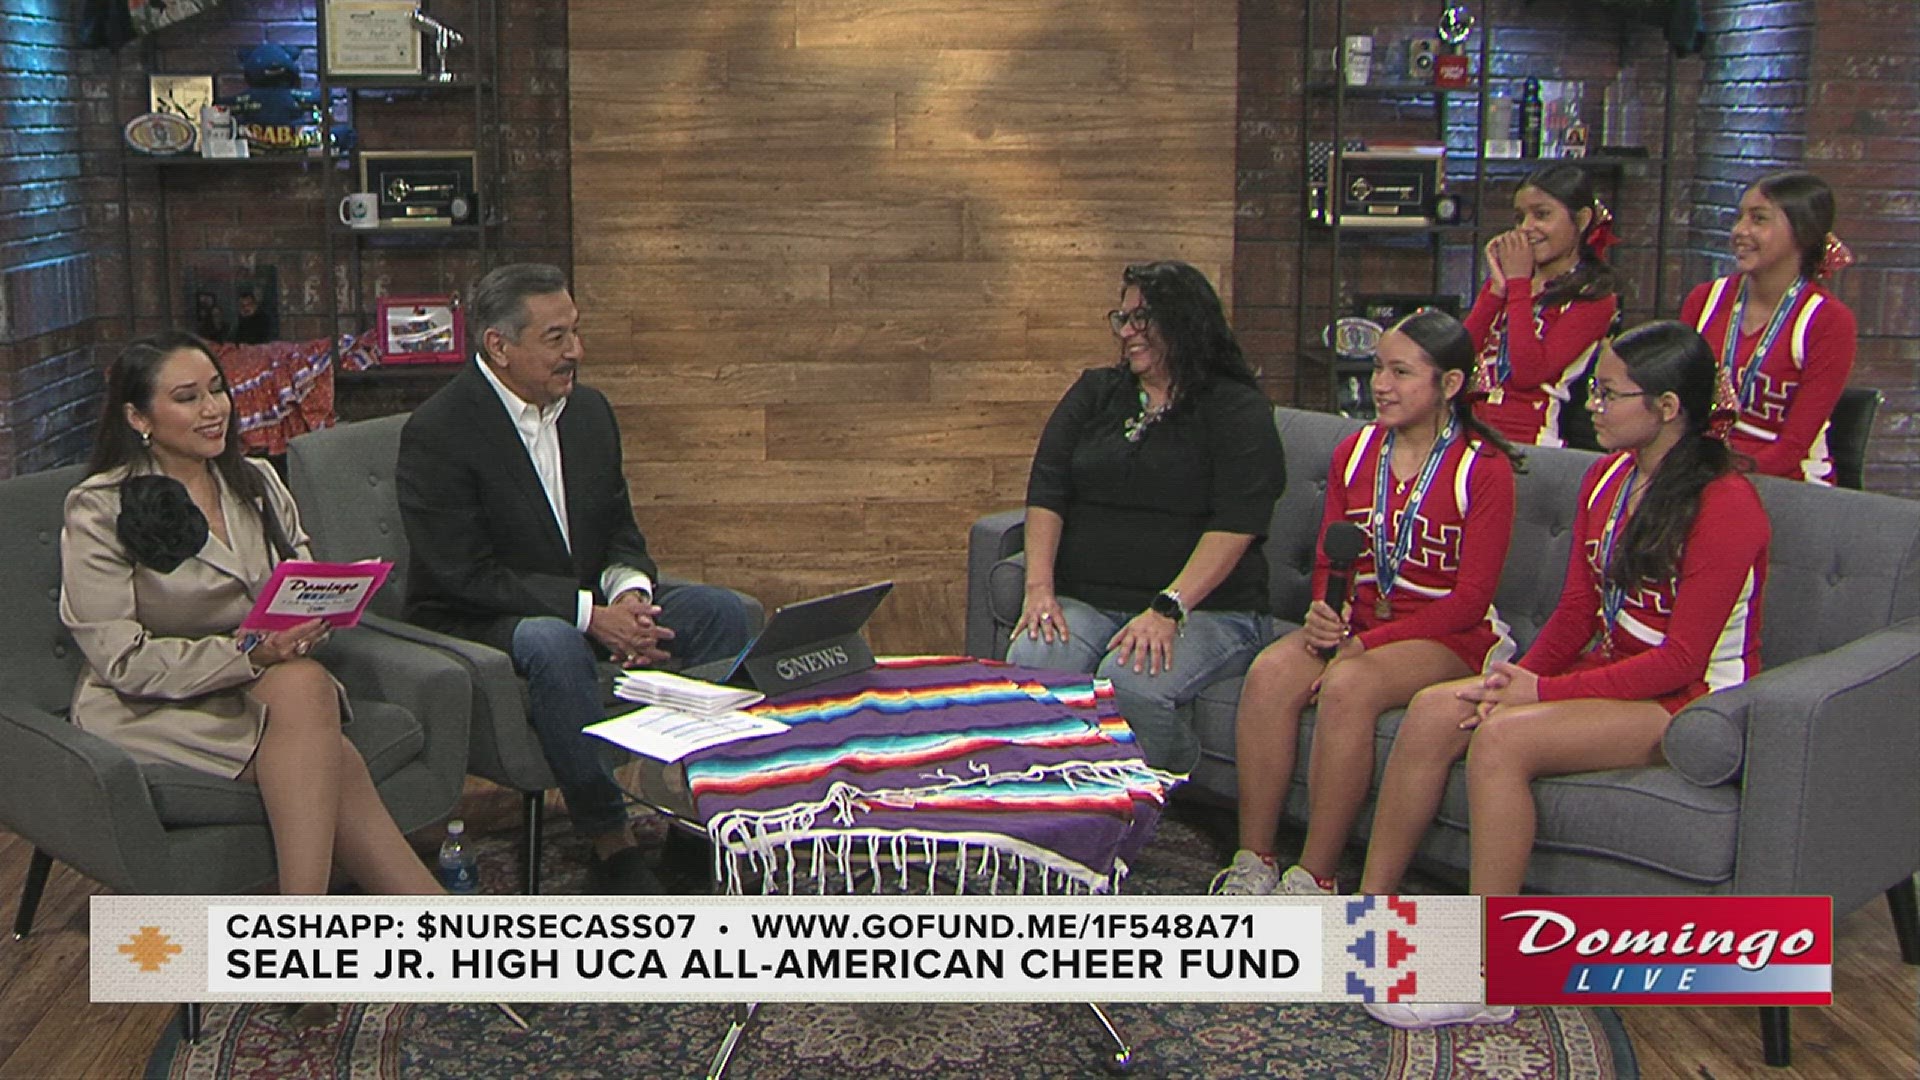 Robstown's Seale Jr. High cheerleaders joined us on Domingo Live to talk about their new UCA All-American status and how folks can help them perform at Disney World.